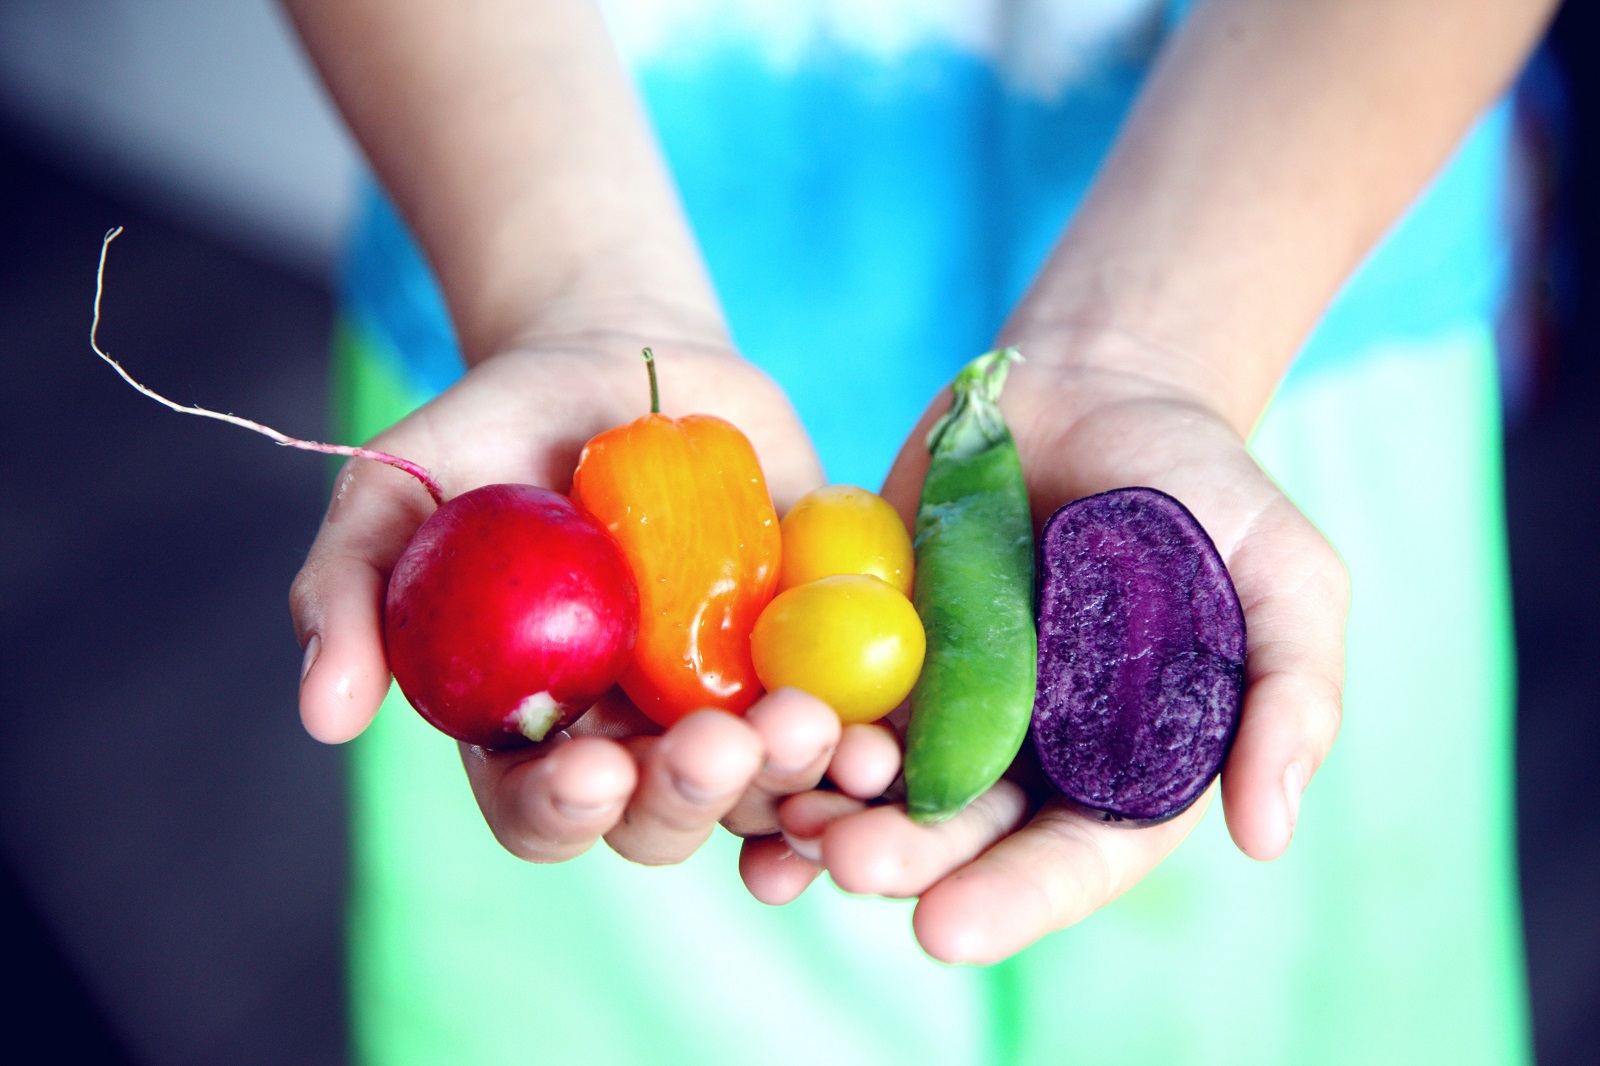 hands holding colorful veggies